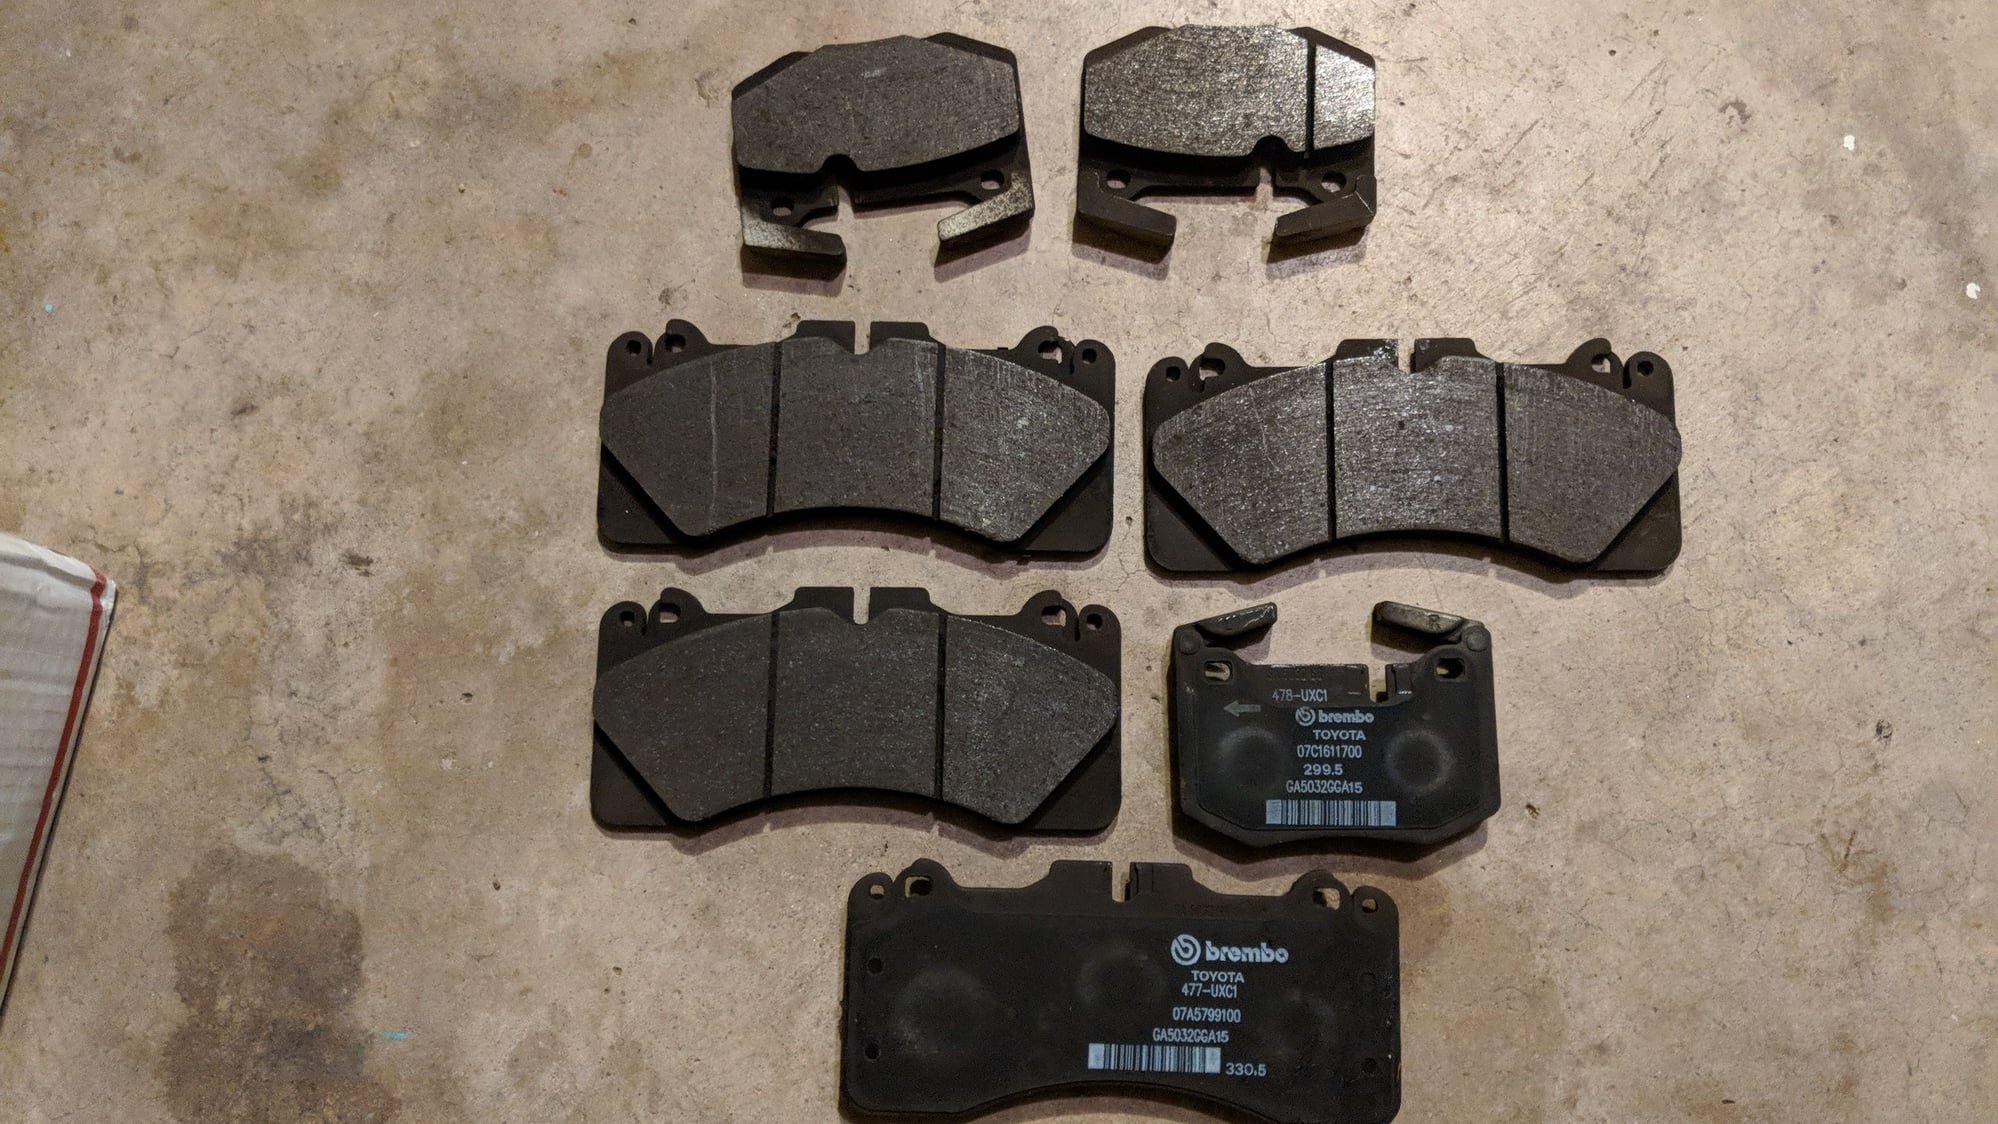 Brakes - FS: as-new, take-off OEM Brembro pads - Used - 2016 to 2019 Lexus GS F - Na, TX 79999, United States